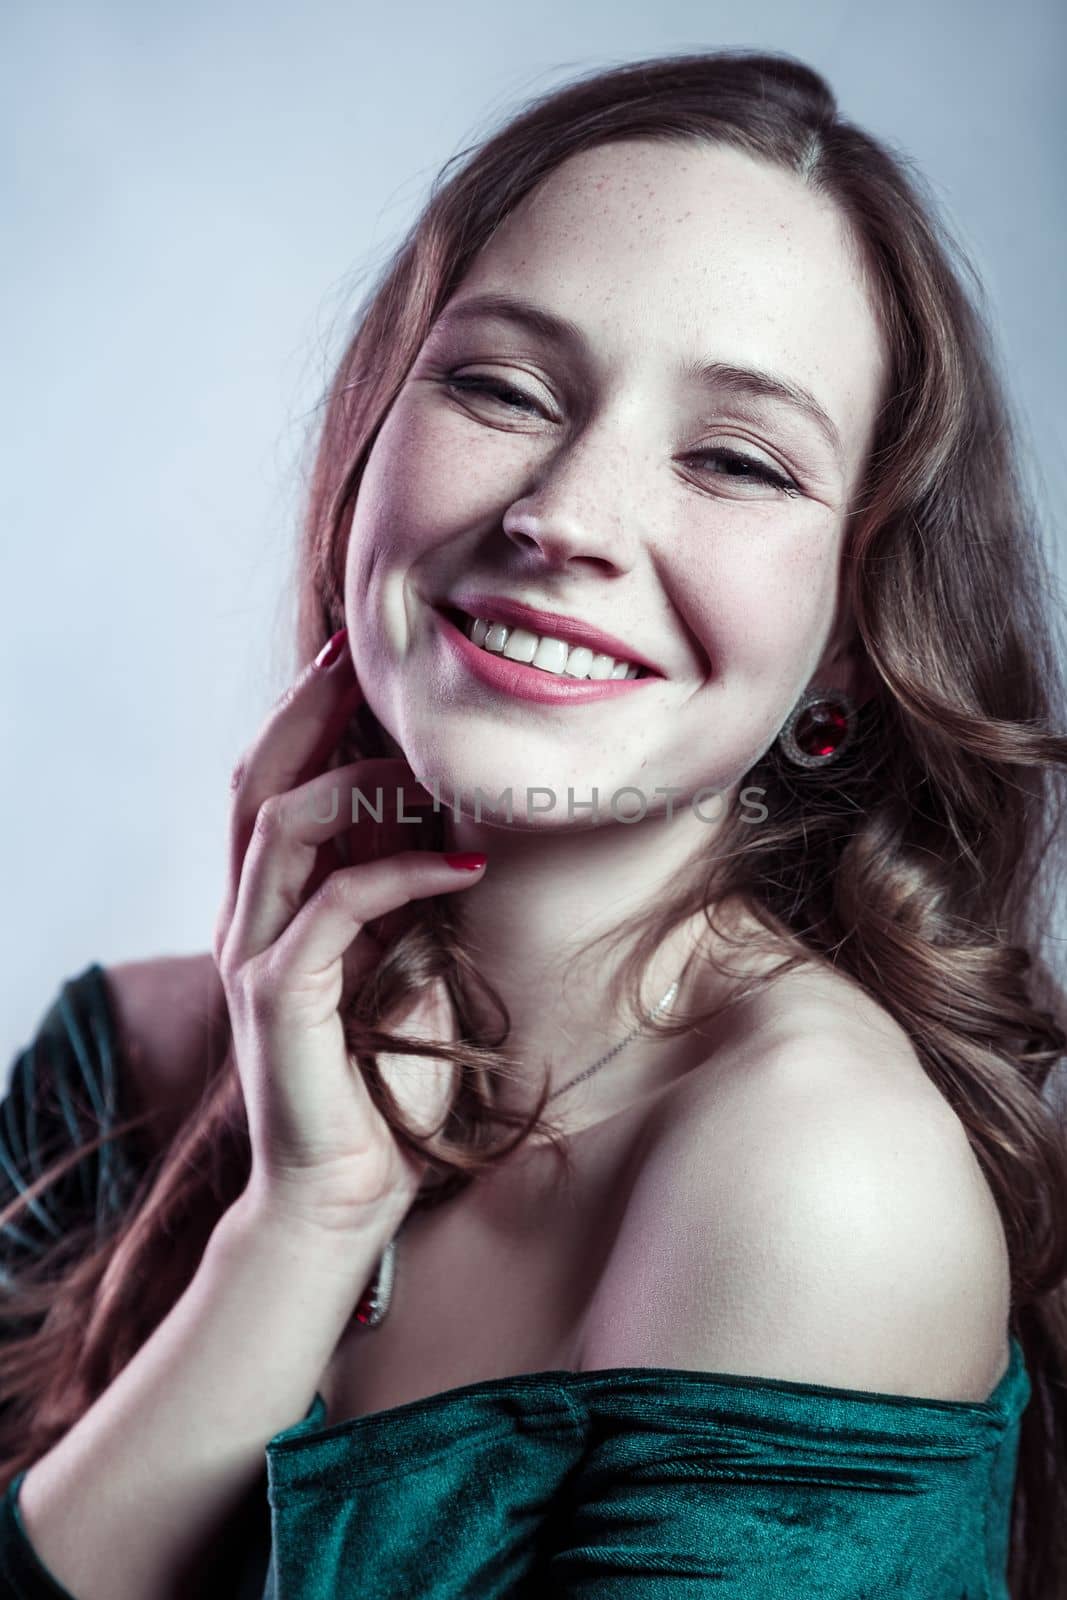 Smiling satisfied elegant woman with wavy hair in green dress looking at camera with toothy smile. by Khosro1